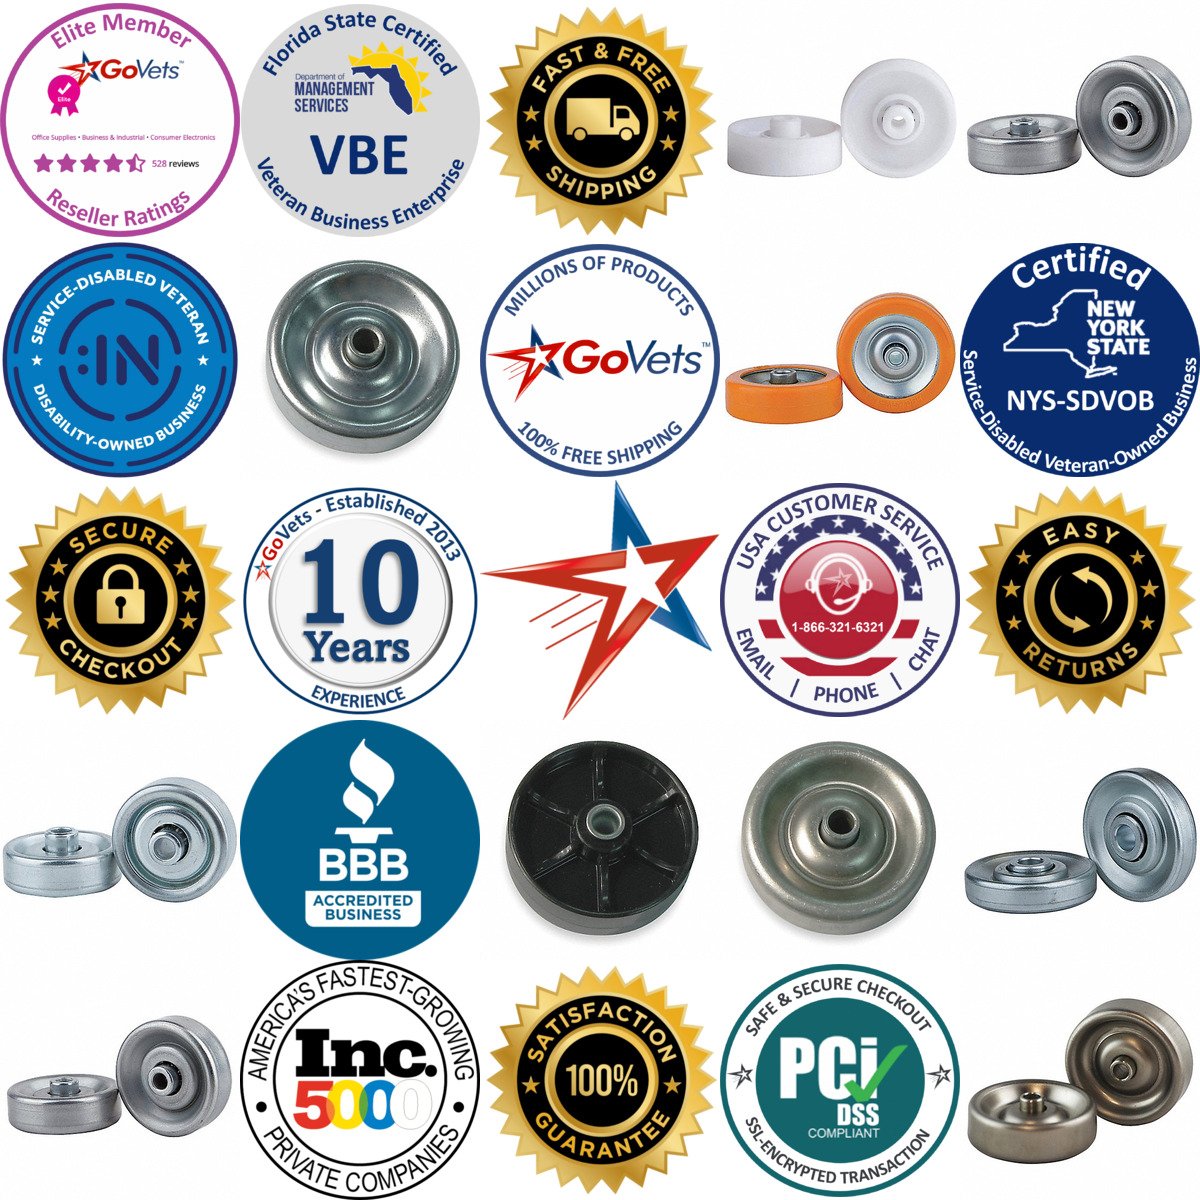 A selection of Skate Wheels products on GoVets